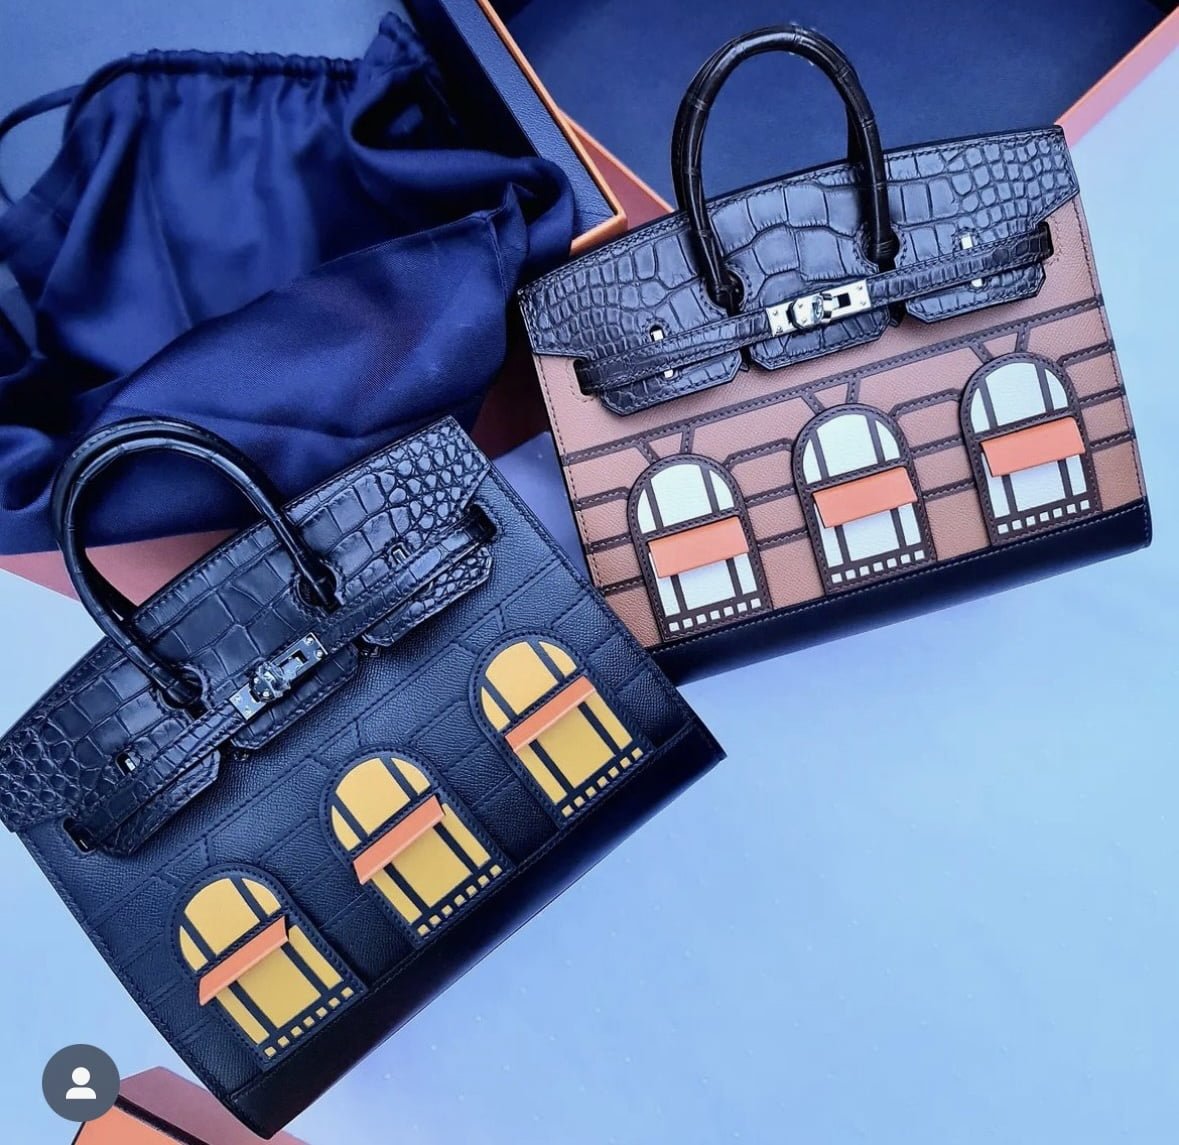 Cheap Louis Vuitton Inspired Bags from China 2023 - Next Best